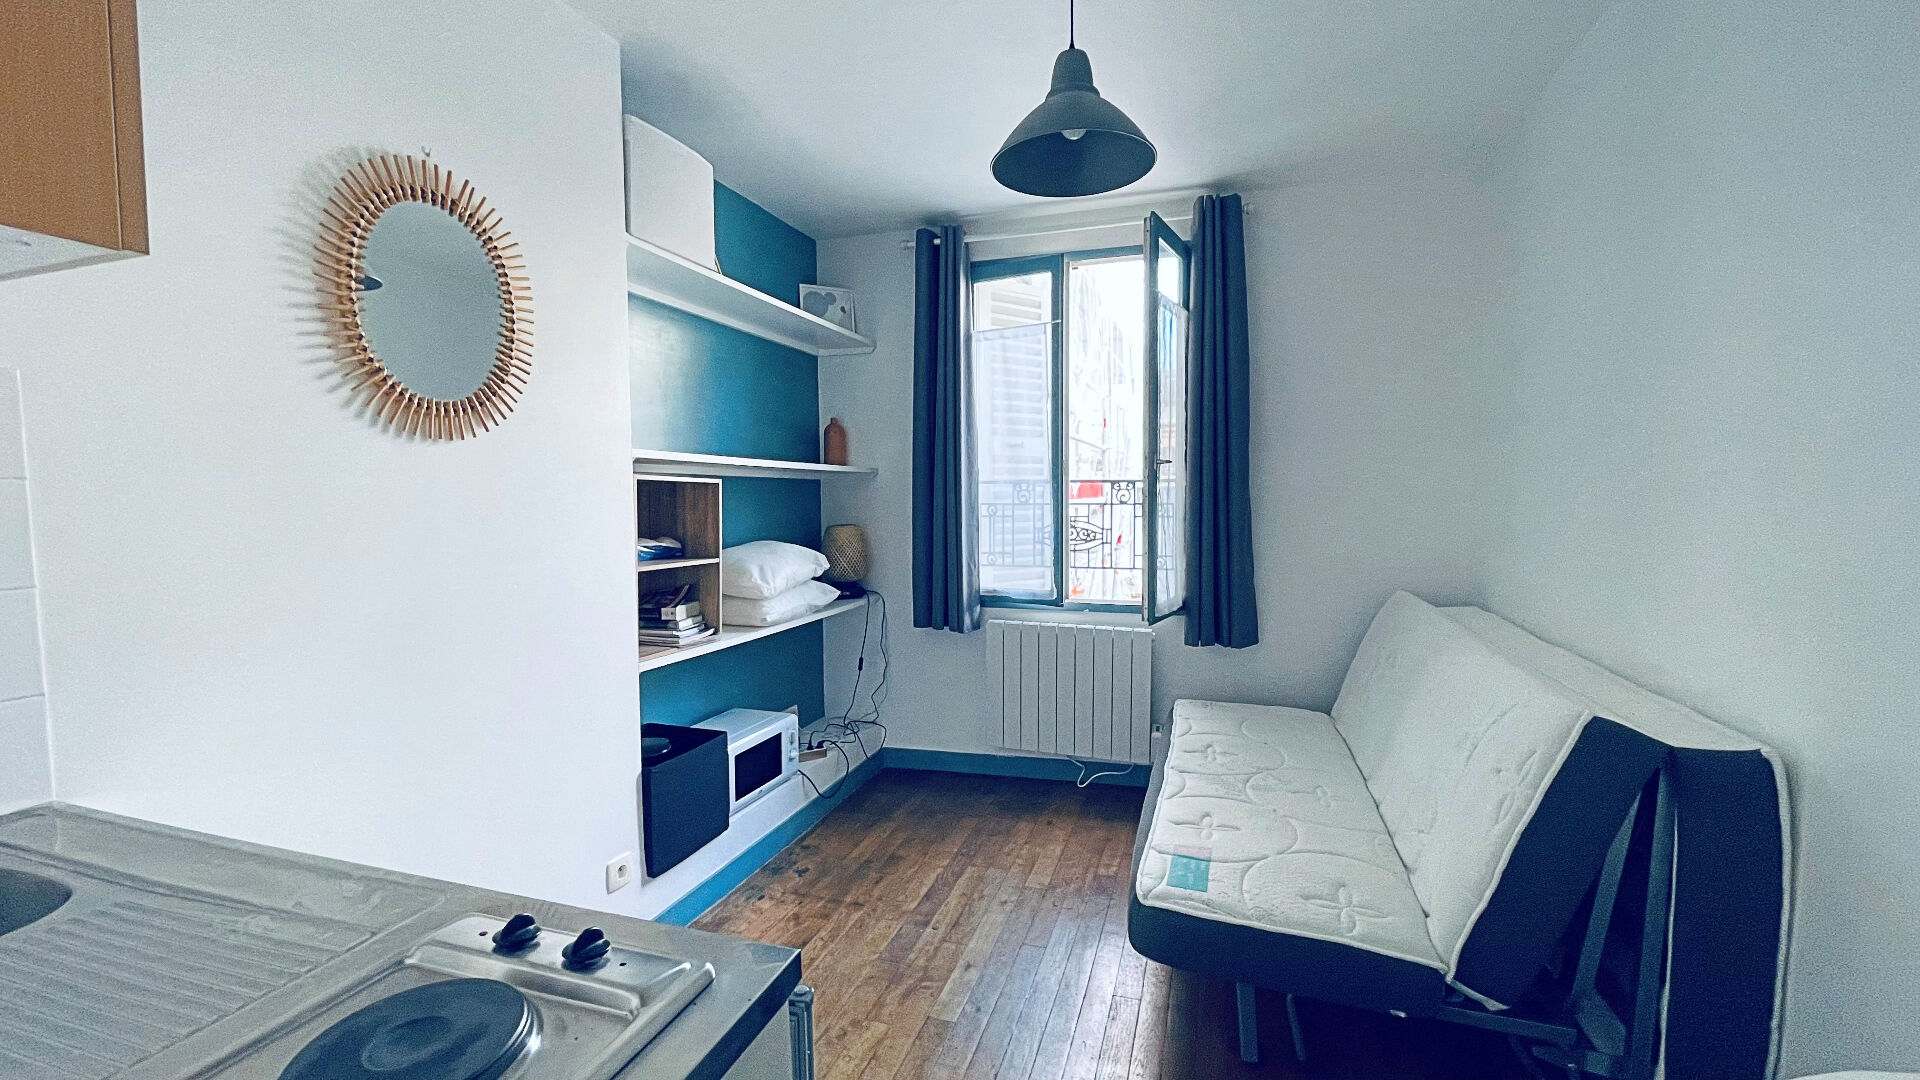 Charming studio with abbesses with open screws! 1